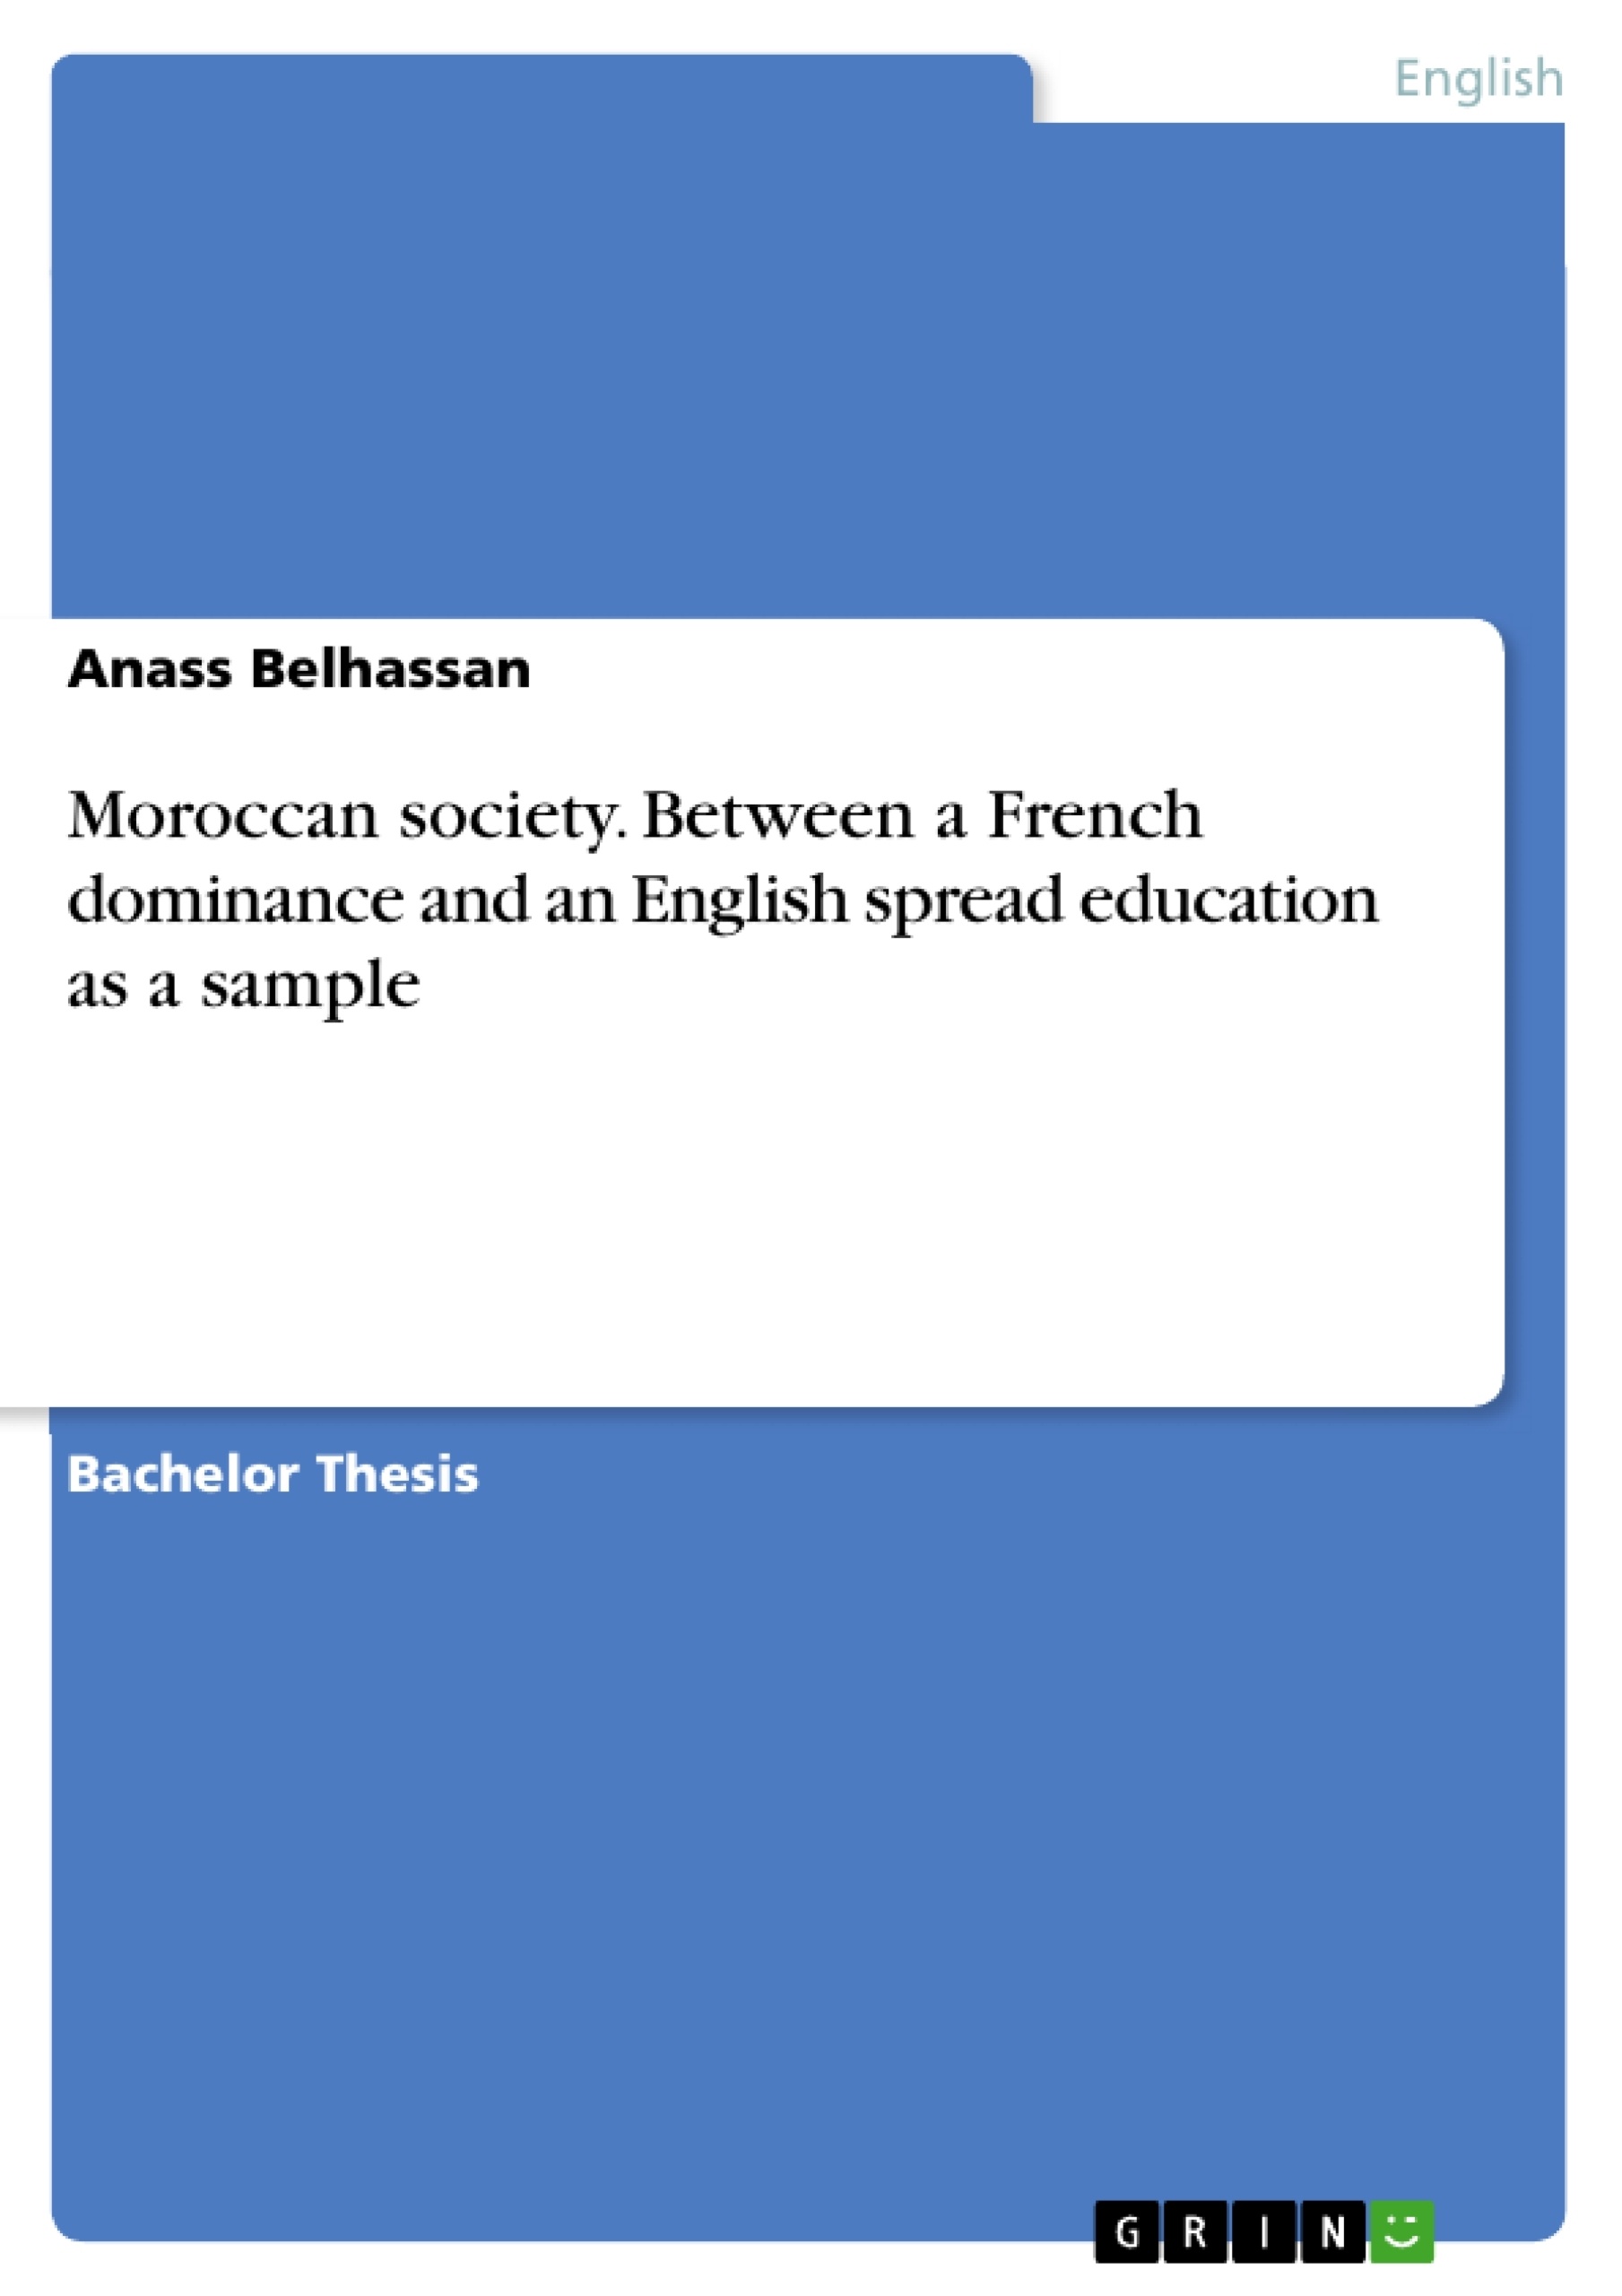 Titre: Moroccan society. Between a French dominance and an English spread education as a sample